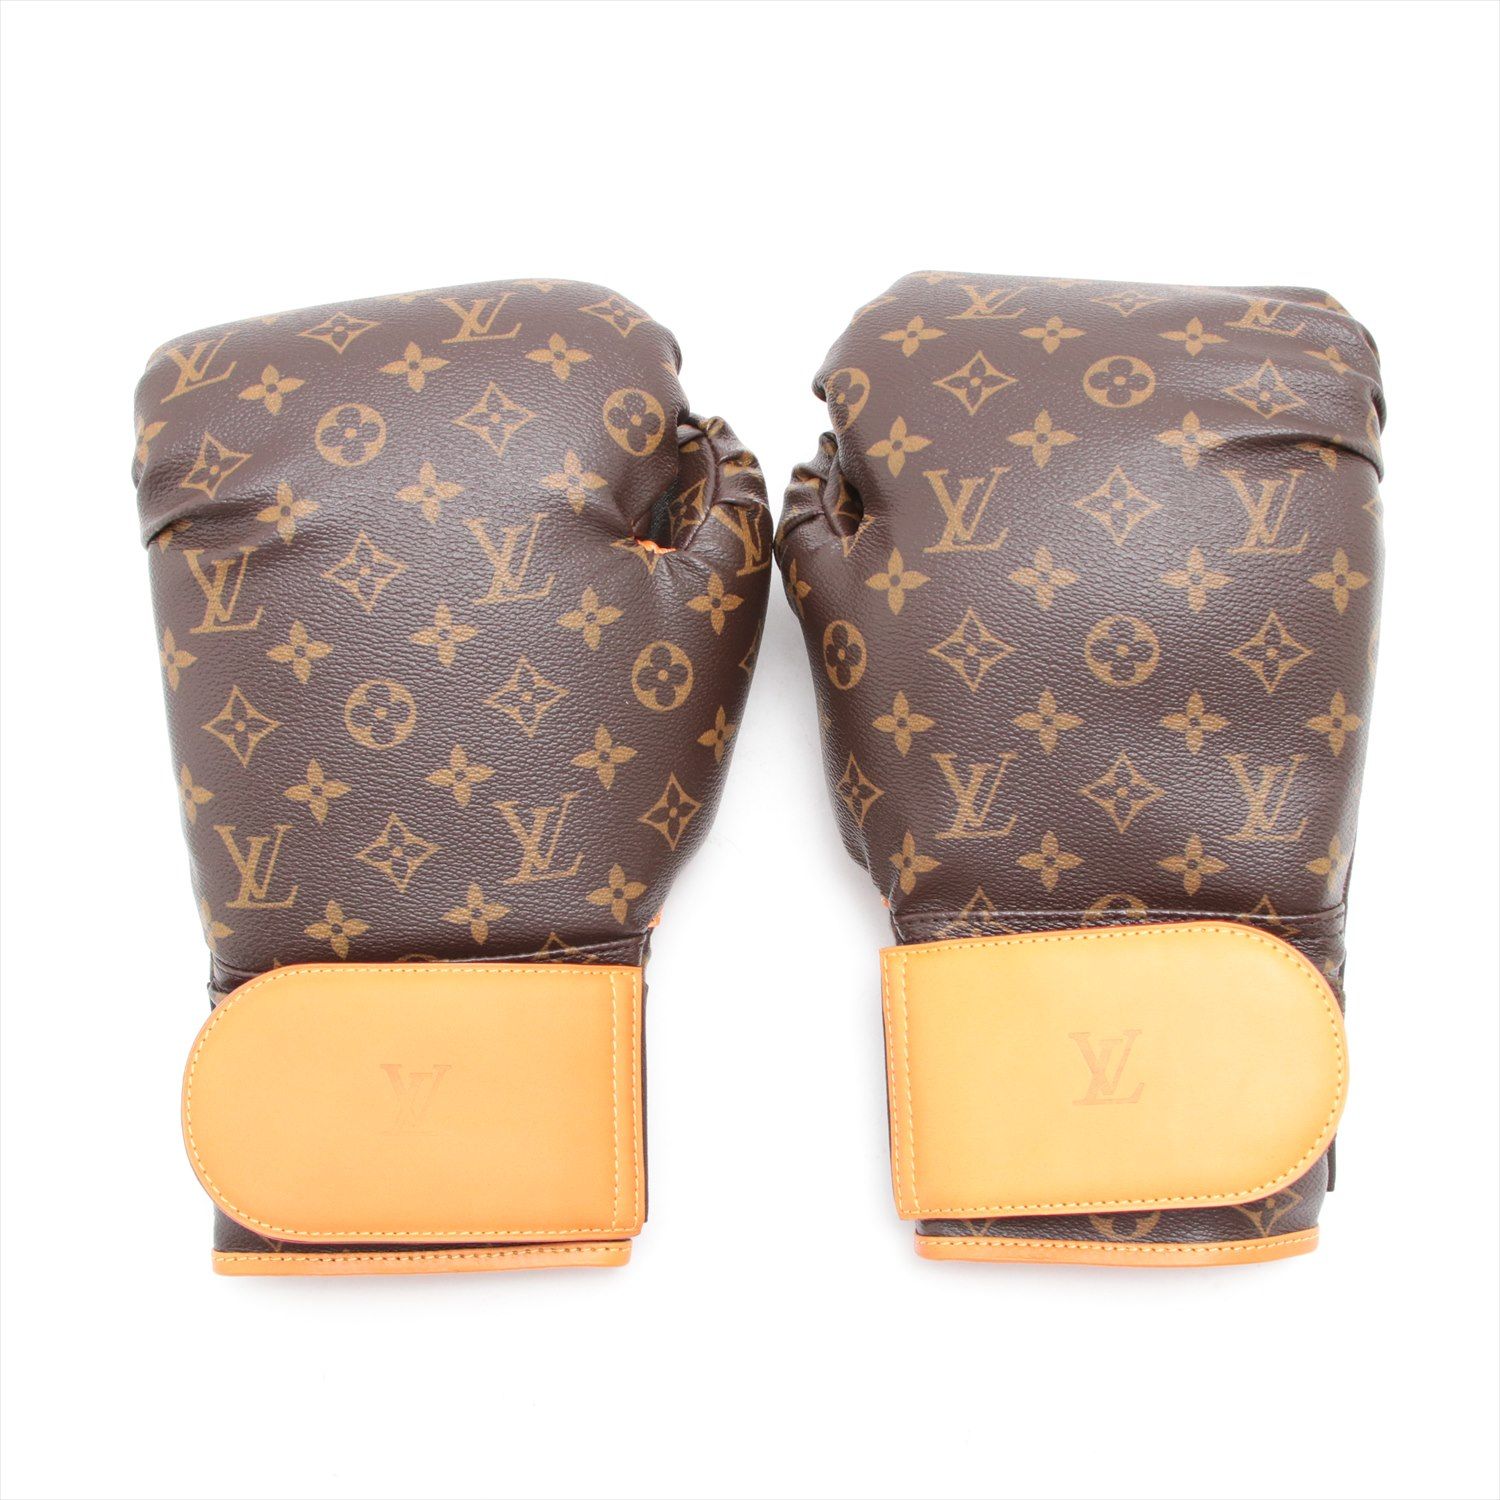 Used goods] Vuitton other PVC Brown Monogram boxing glove set (case, glove  × 2, mat) Karl Lagerfeld ｜ DOKODEMO